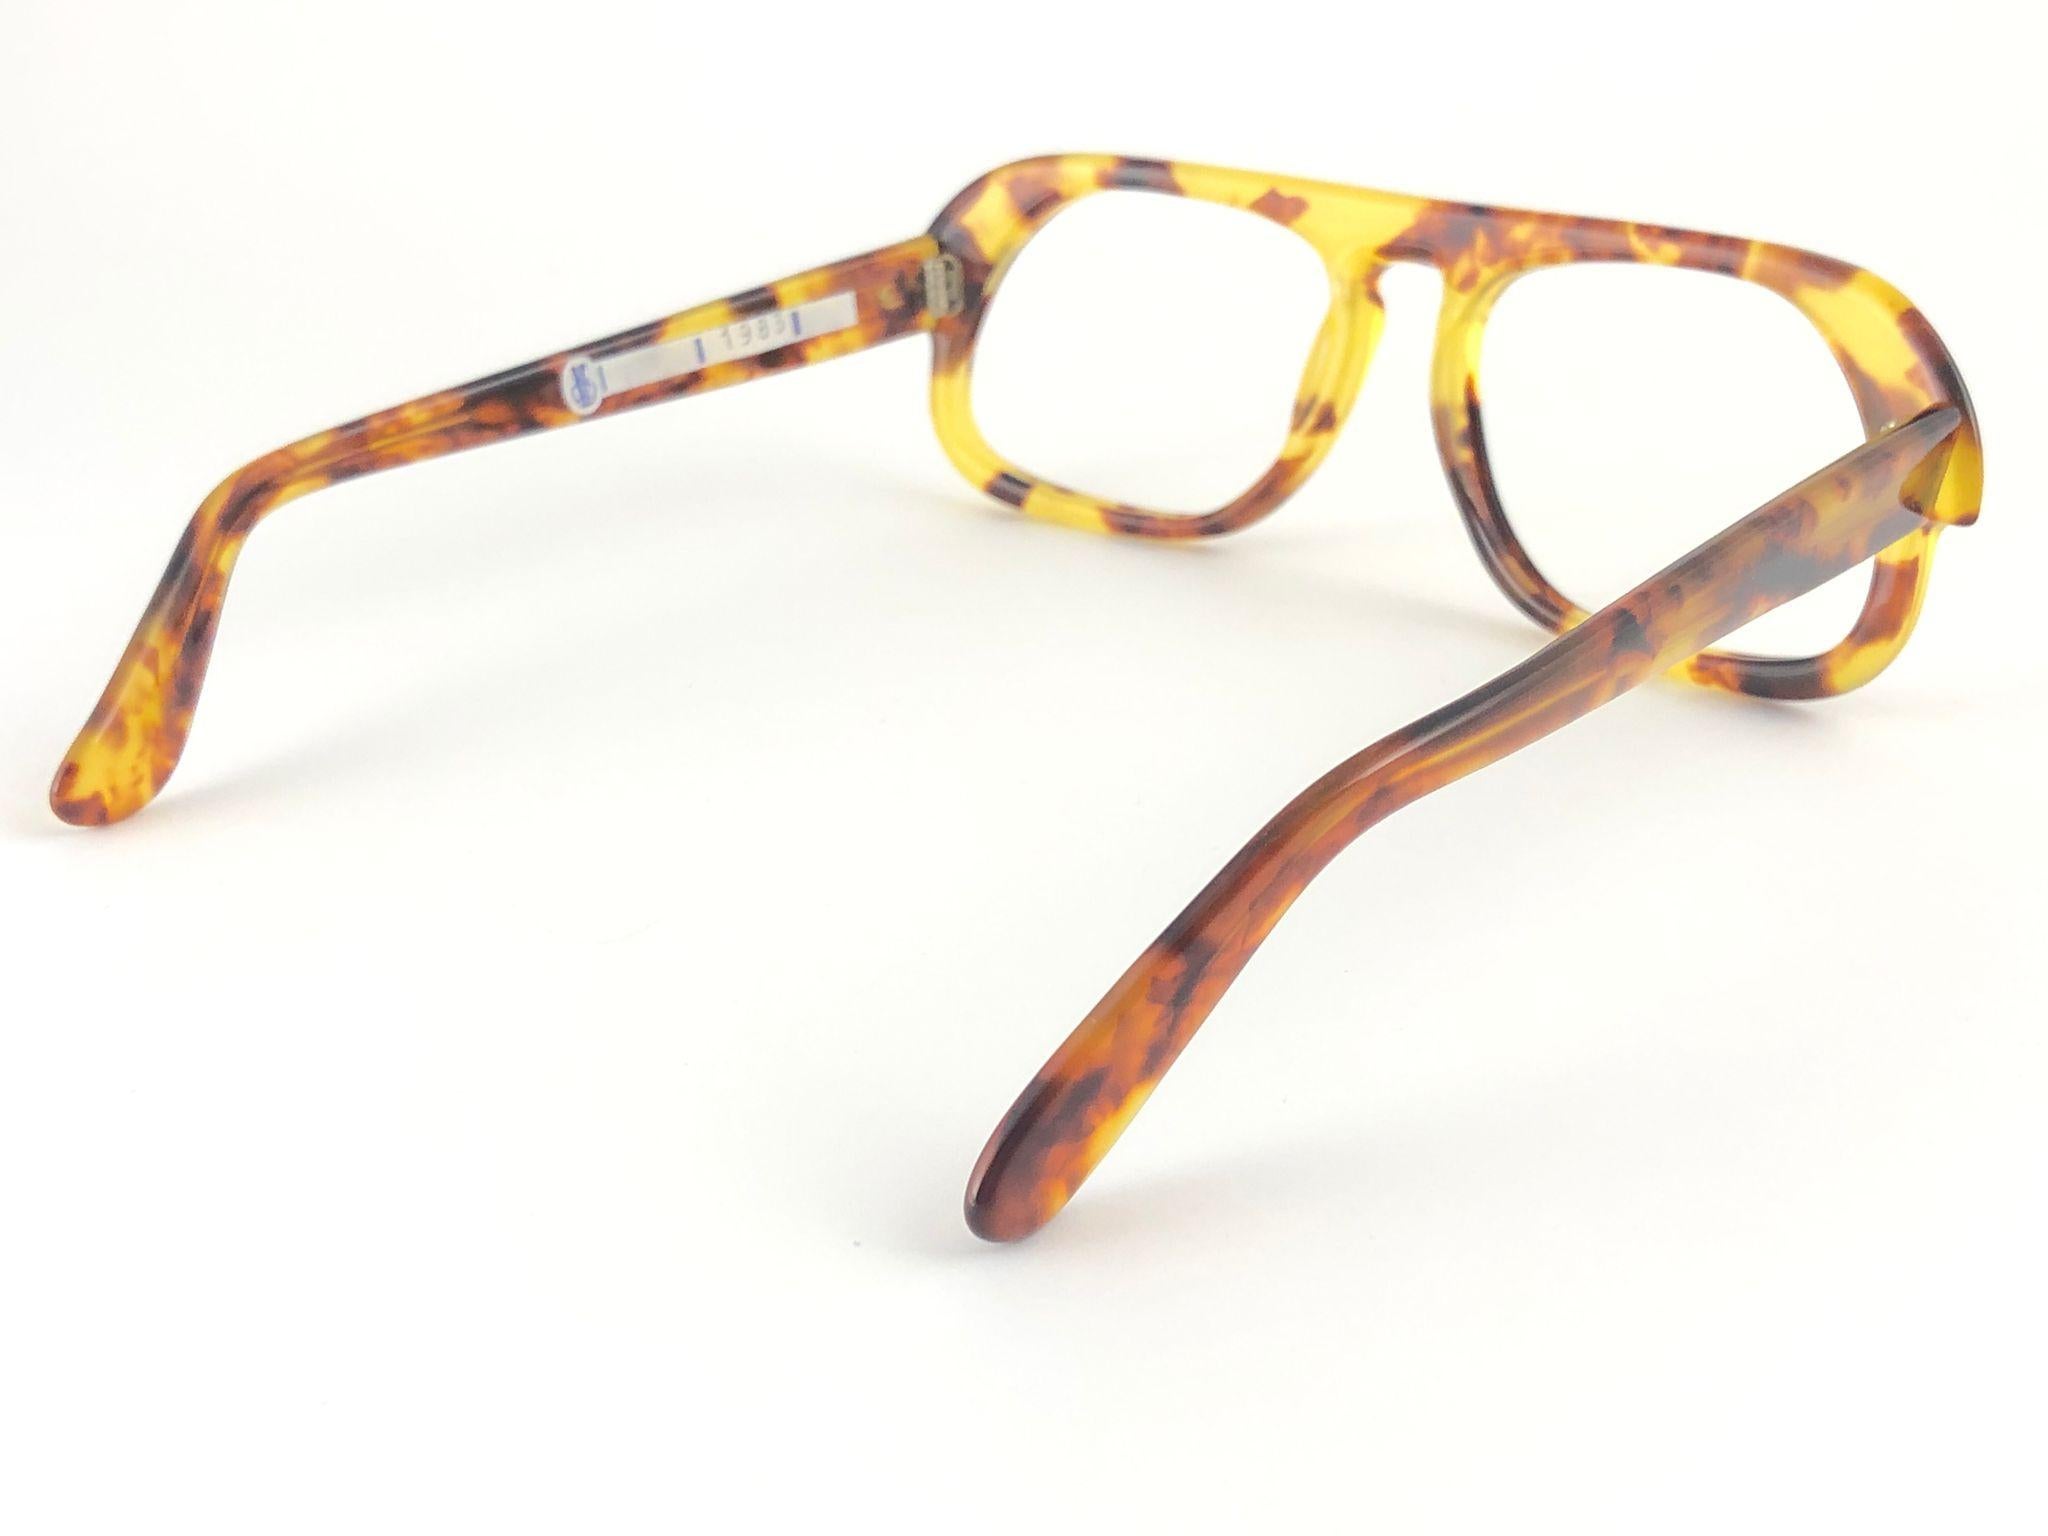 New Vintage Rare Pierre Cardin C 22 Light Tortoise RX 1960's sunglasses In New Condition For Sale In Baleares, Baleares